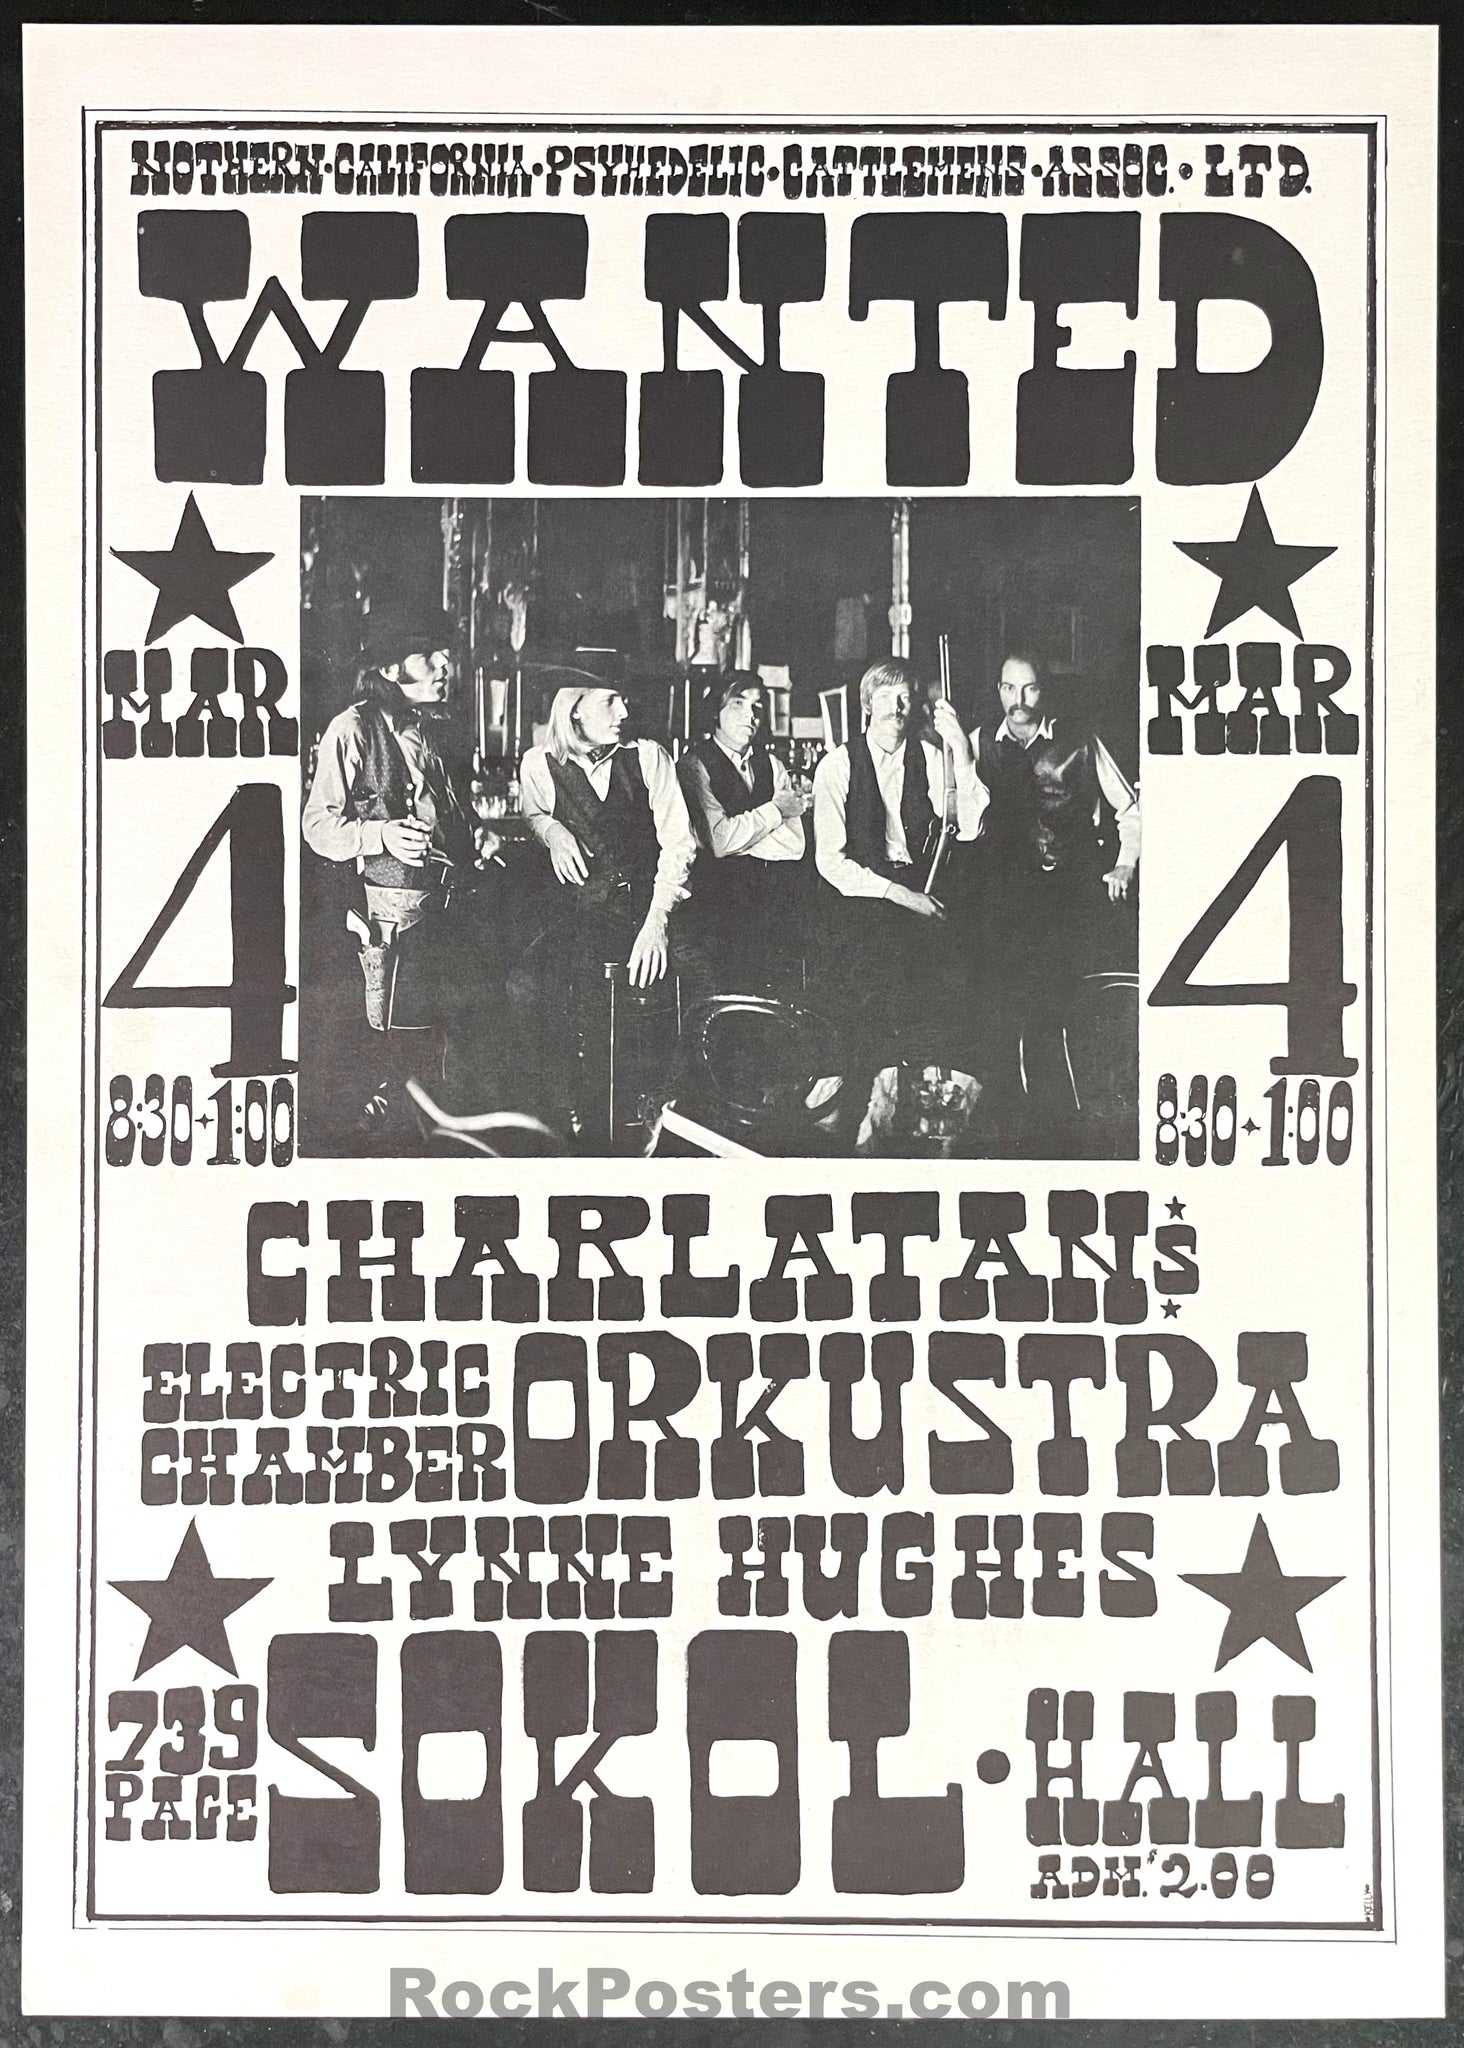 AUCTION - AOR Page 68 - Charlatans - 1967 Poster - Sokol Hall - Near Mint